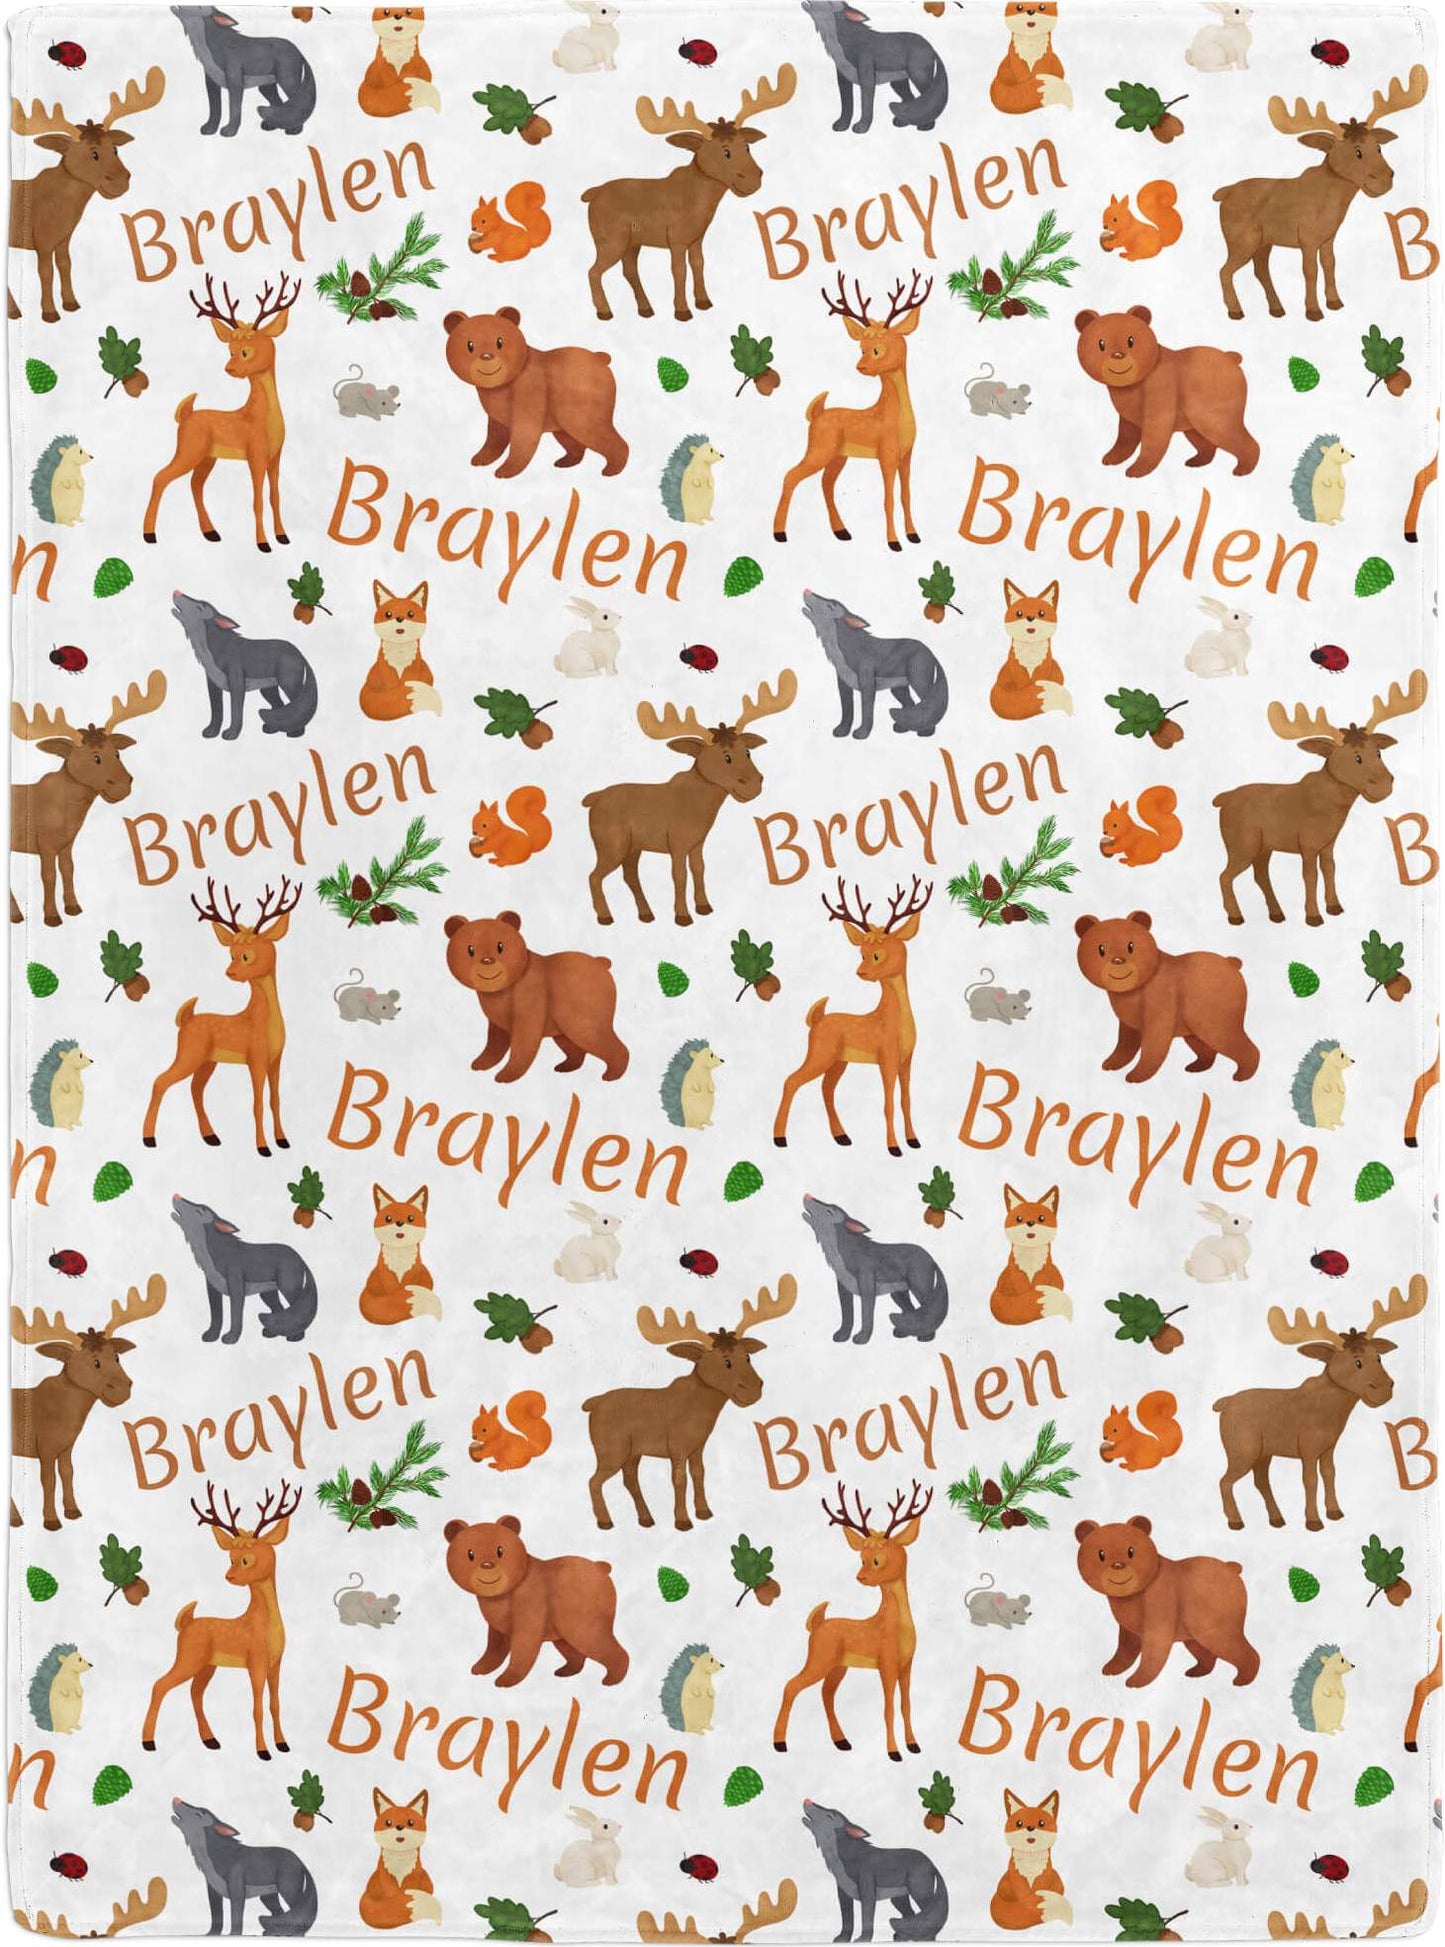 Personalized Baby Woodland Blanket with Name and Animals: Fox, Deer, Moose, Bear